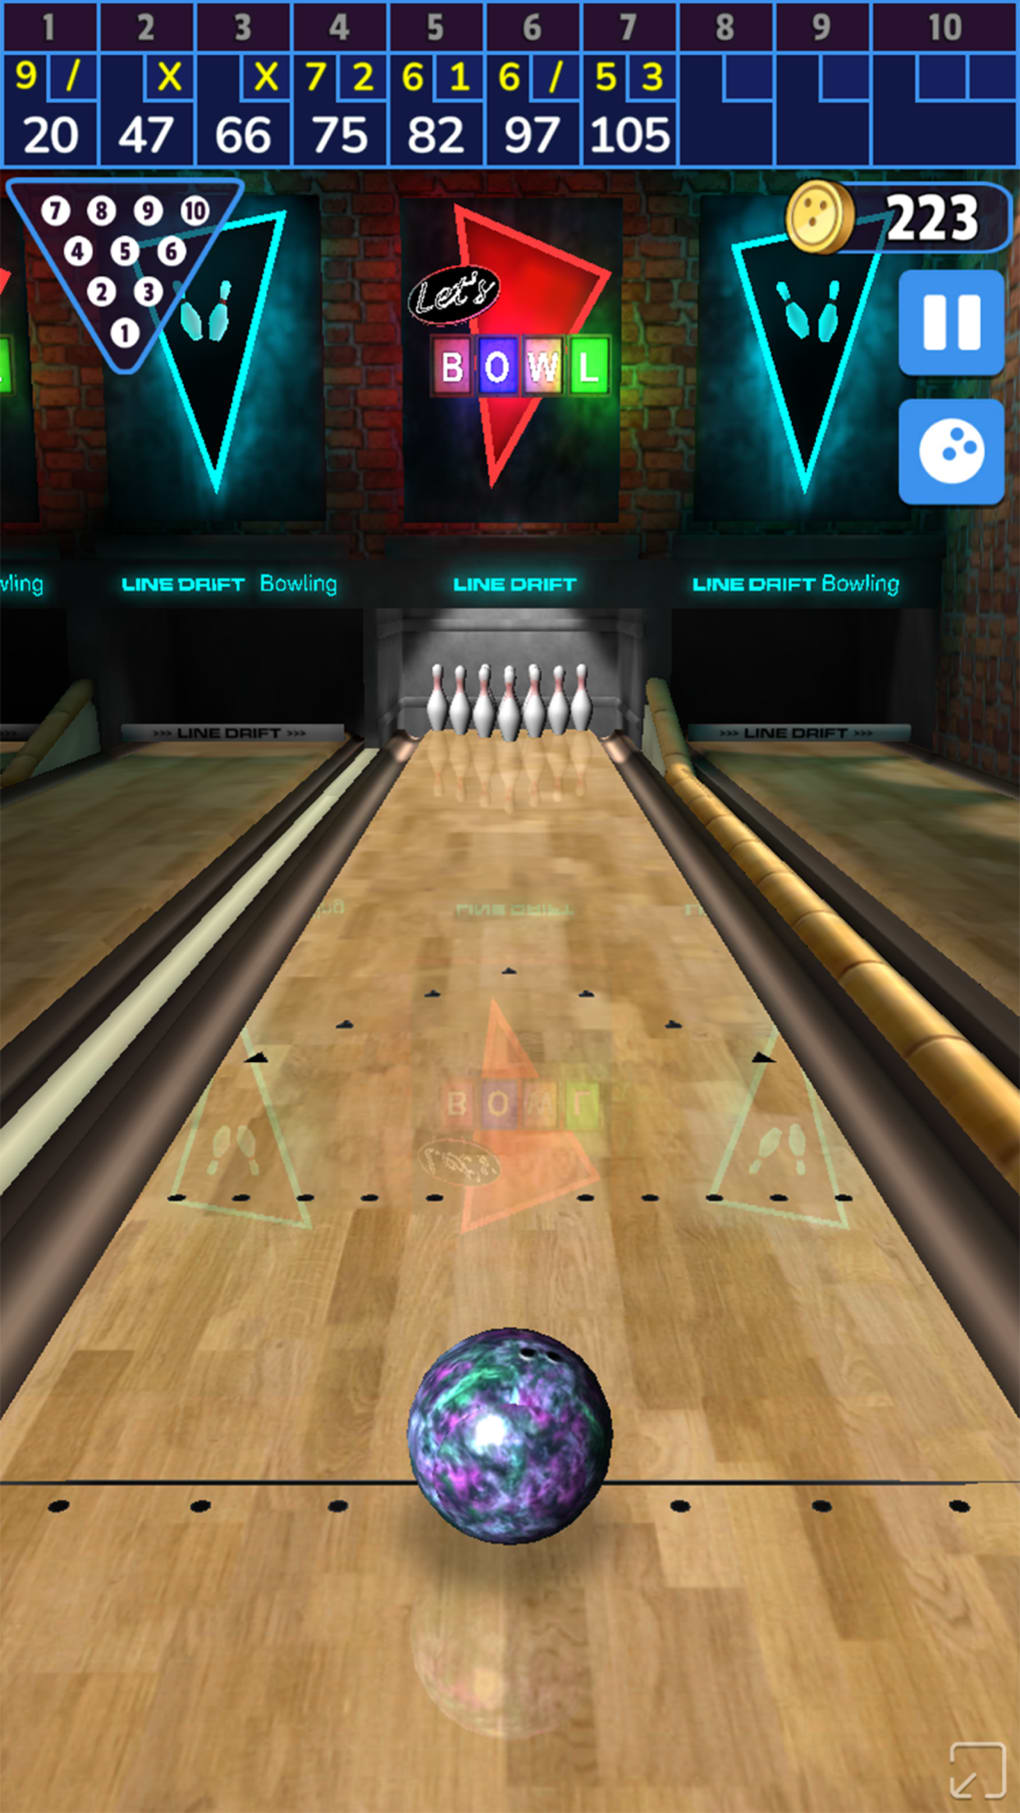 Bowling Lets Bowl 2 for iPhone